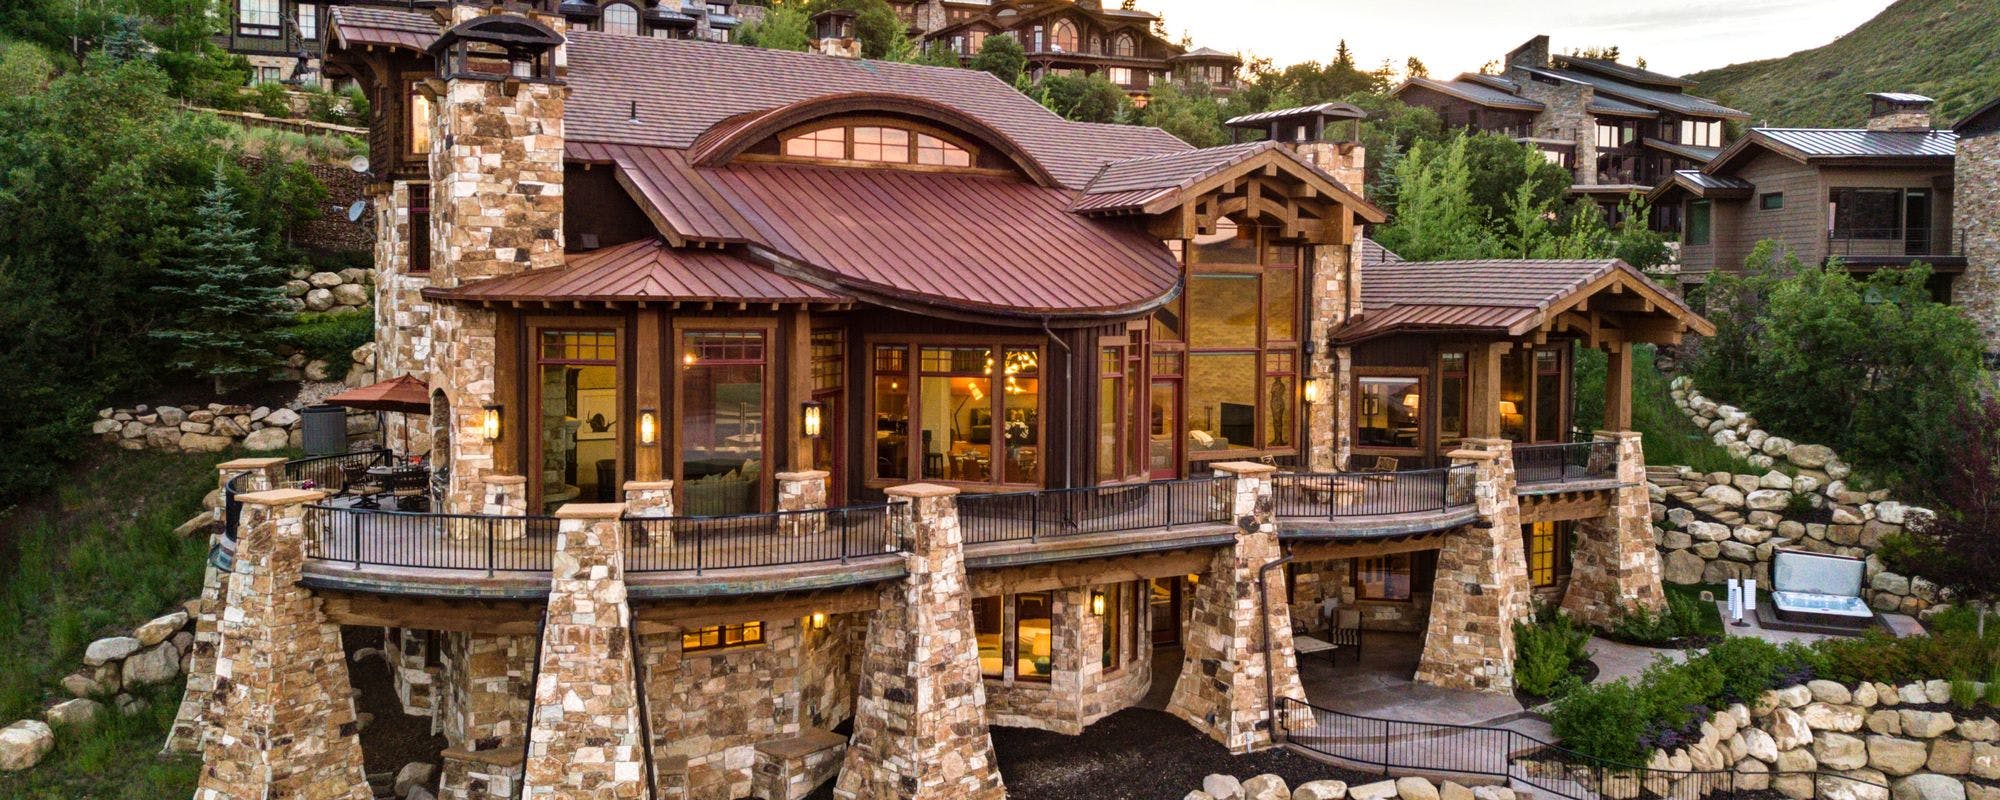 Expansive exterior of a Park City vacation rental.